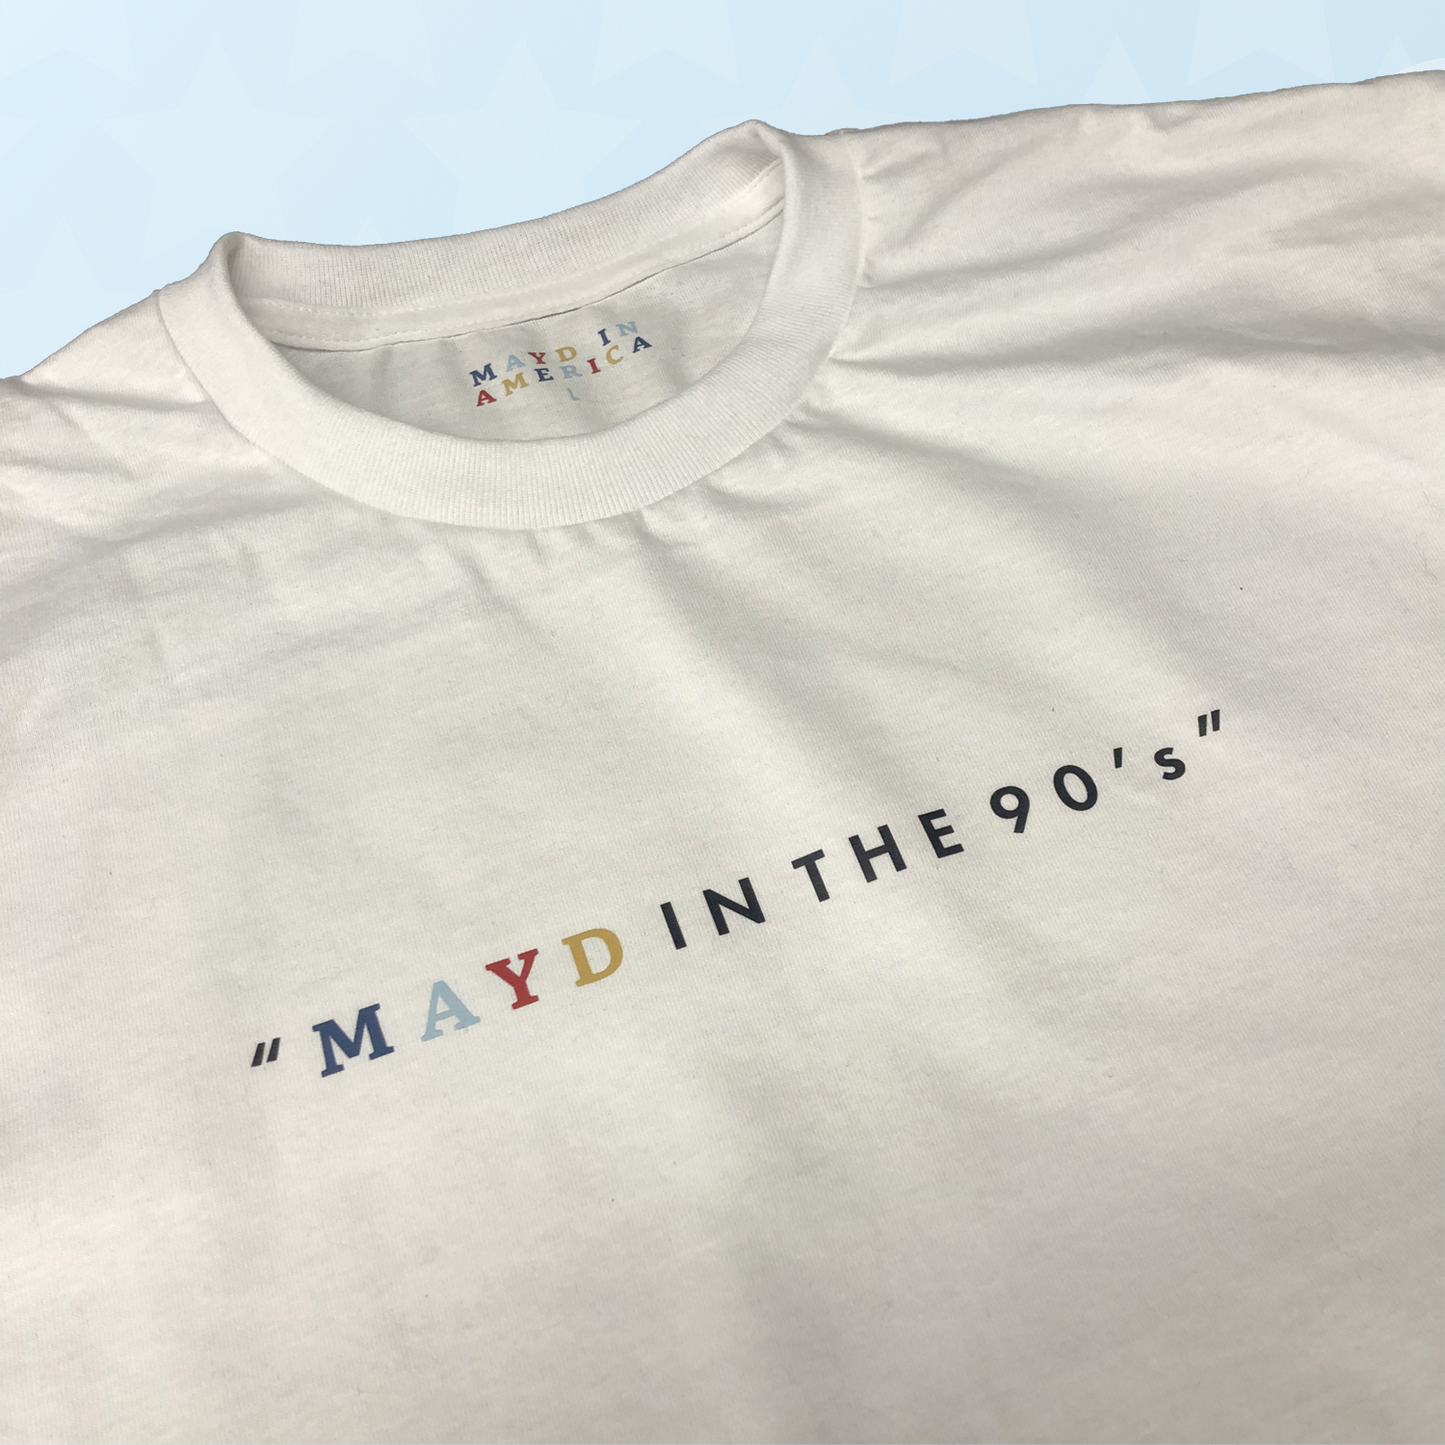 MAYD in America "Mayd in the 90s" T-shirt